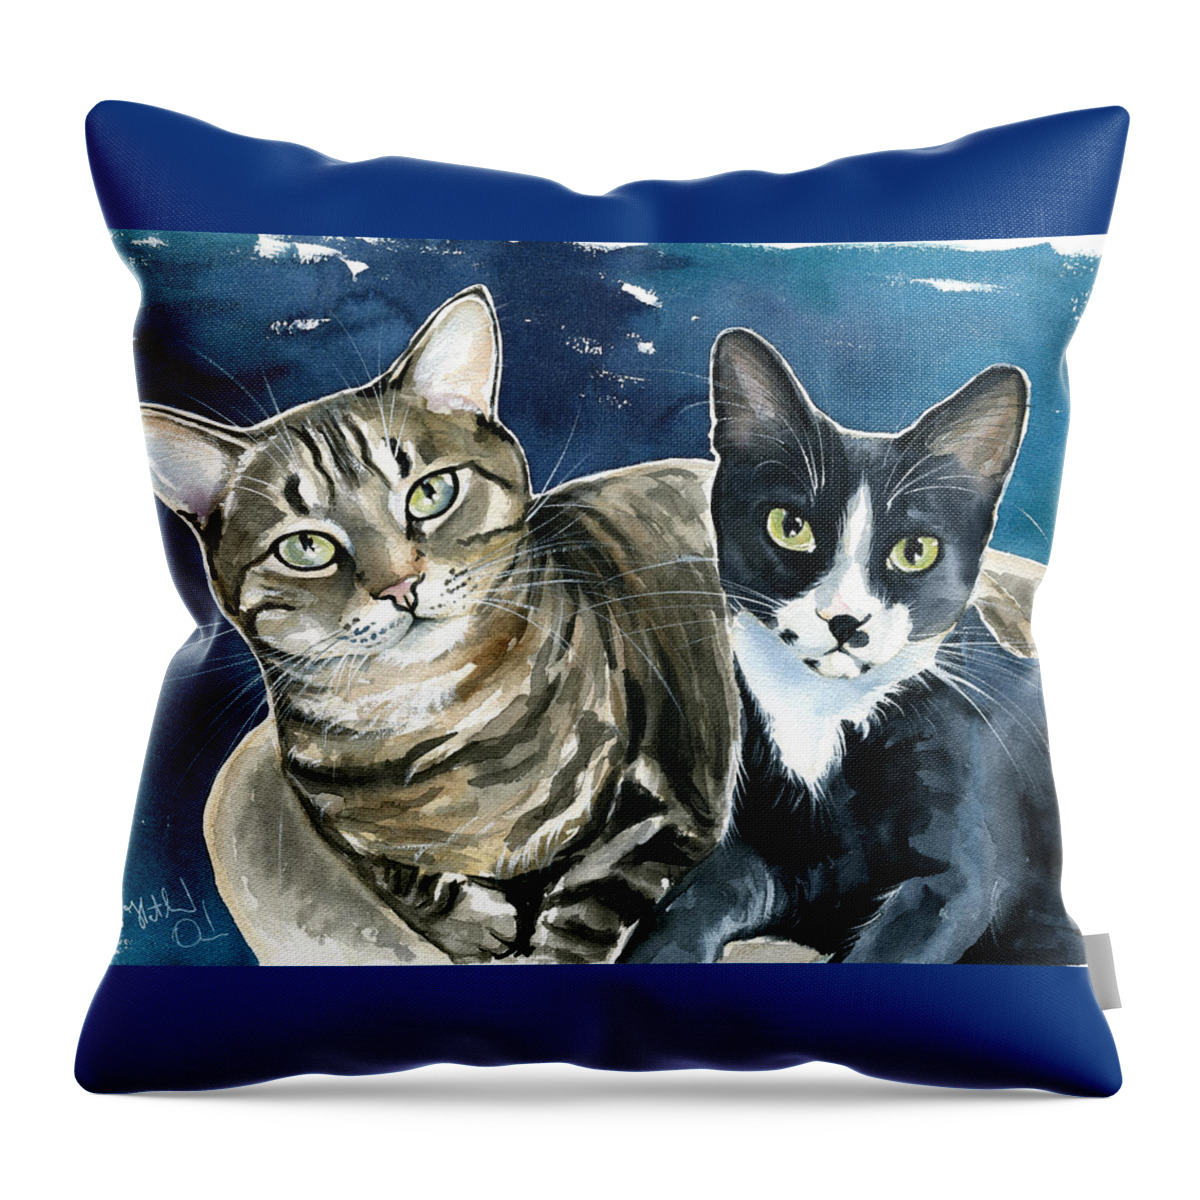 Cat Throw Pillow featuring the painting Xani and Zach Cat Painting by Dora Hathazi Mendes